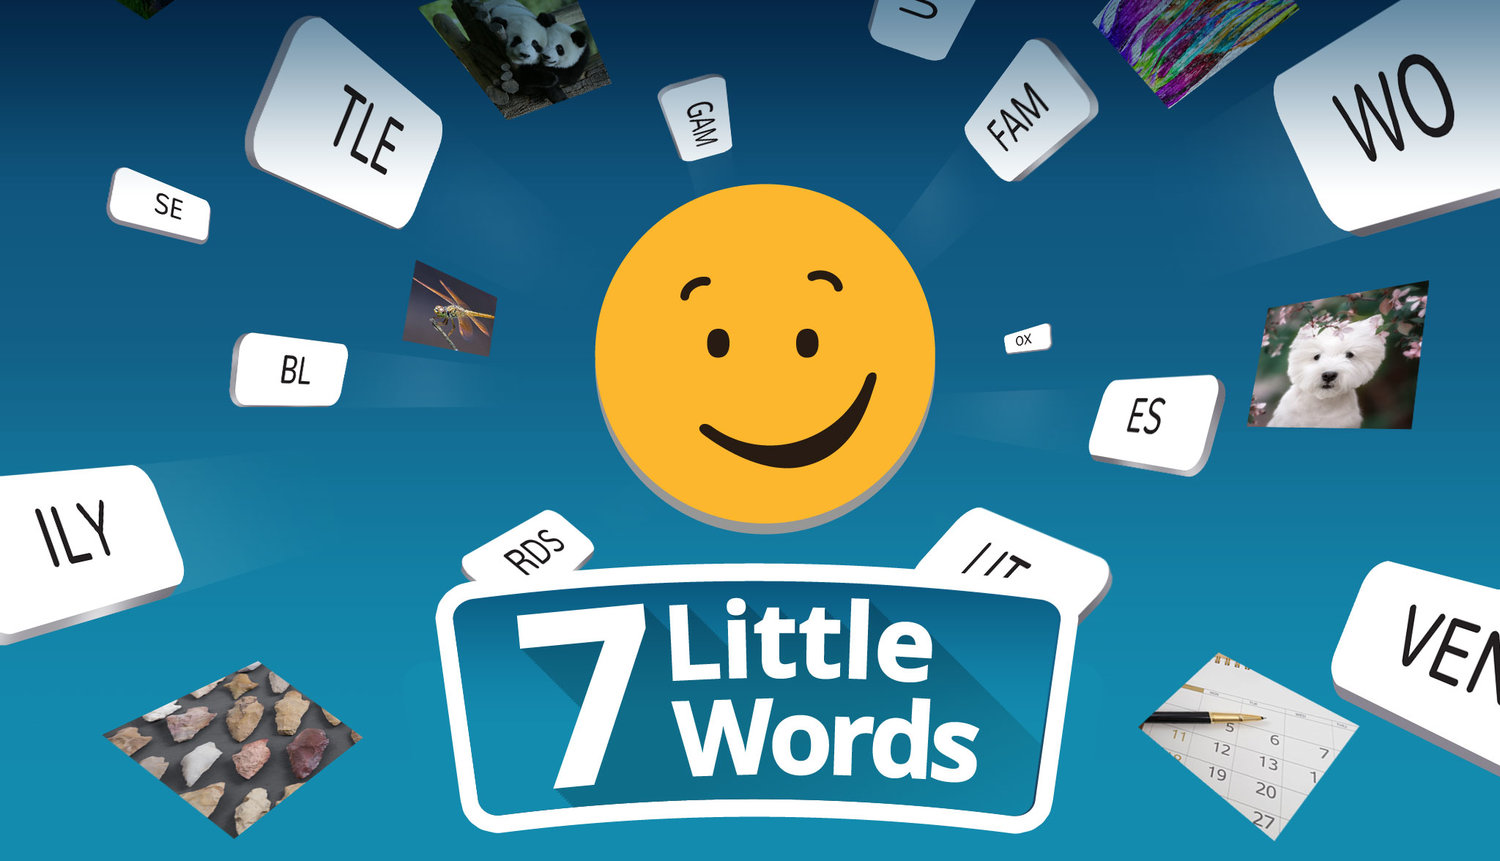 7 Little Words, More than Just a Puzzle Game